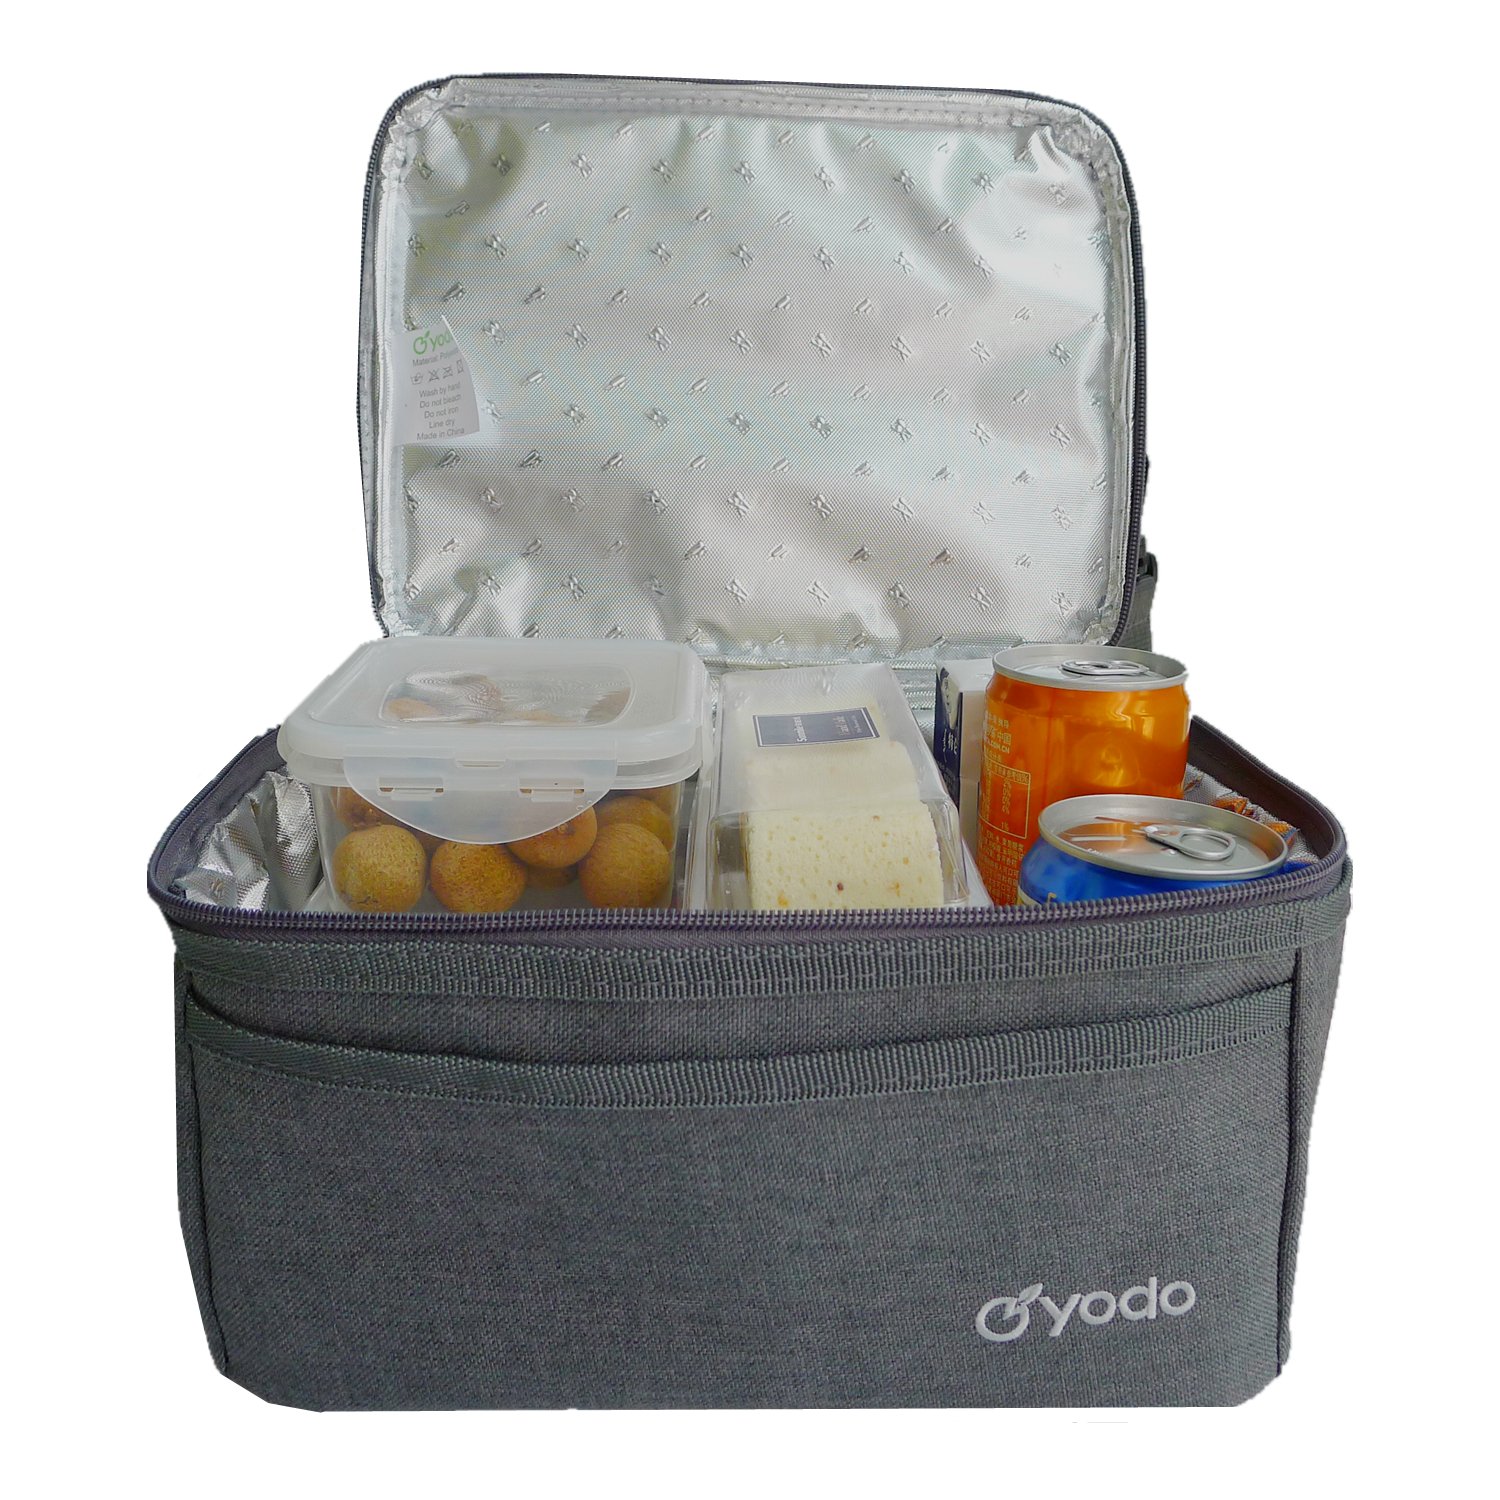 yodo Large Lunch Bag Double Layer Cooler Tote Bag for Adult Women and Men - Idea for Beach, Picnics, Road Trip, Meal Prep, Everyday Lunch to Work, Gray